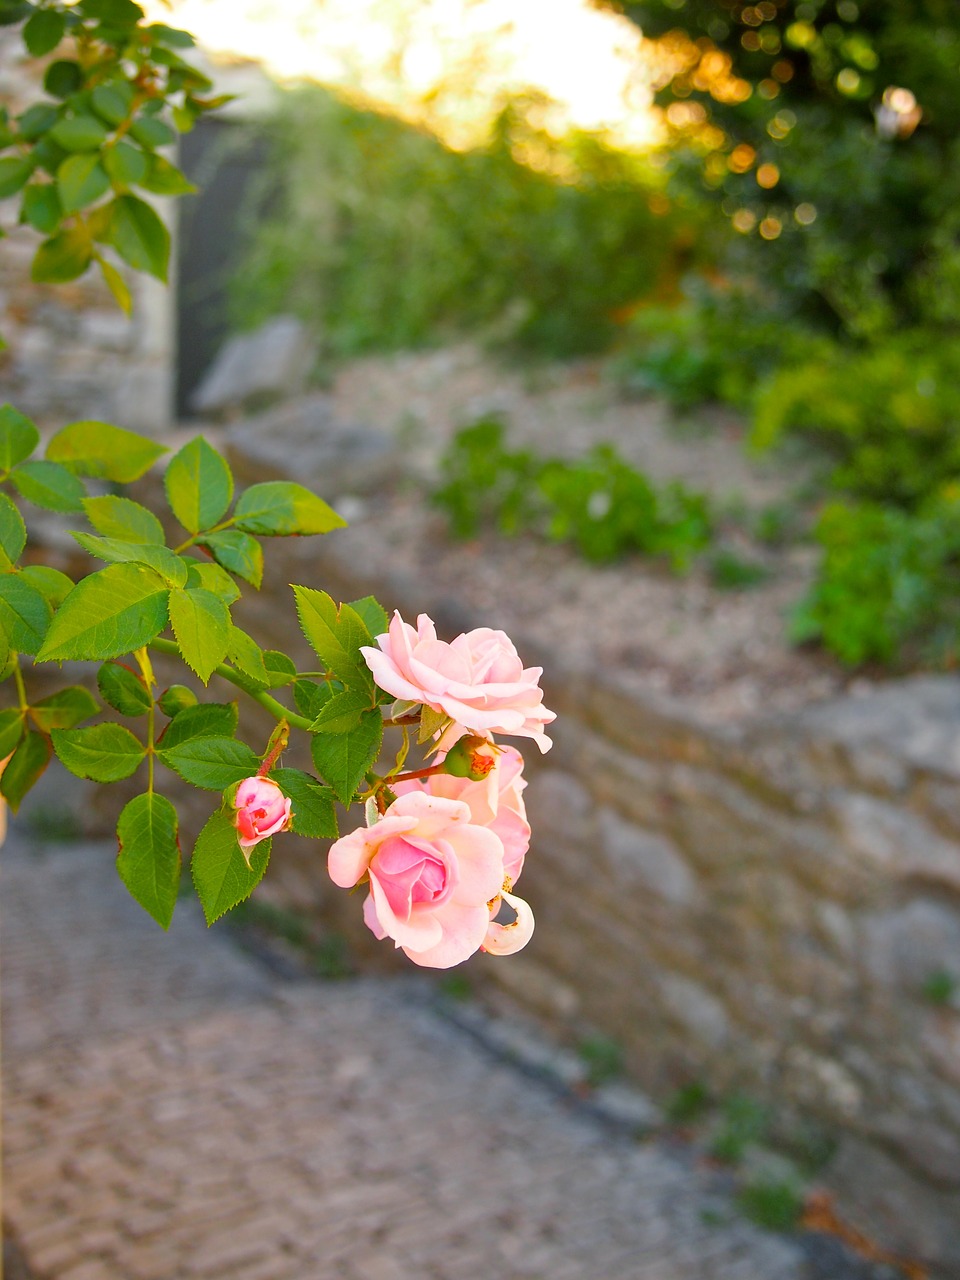 rose summer south free photo